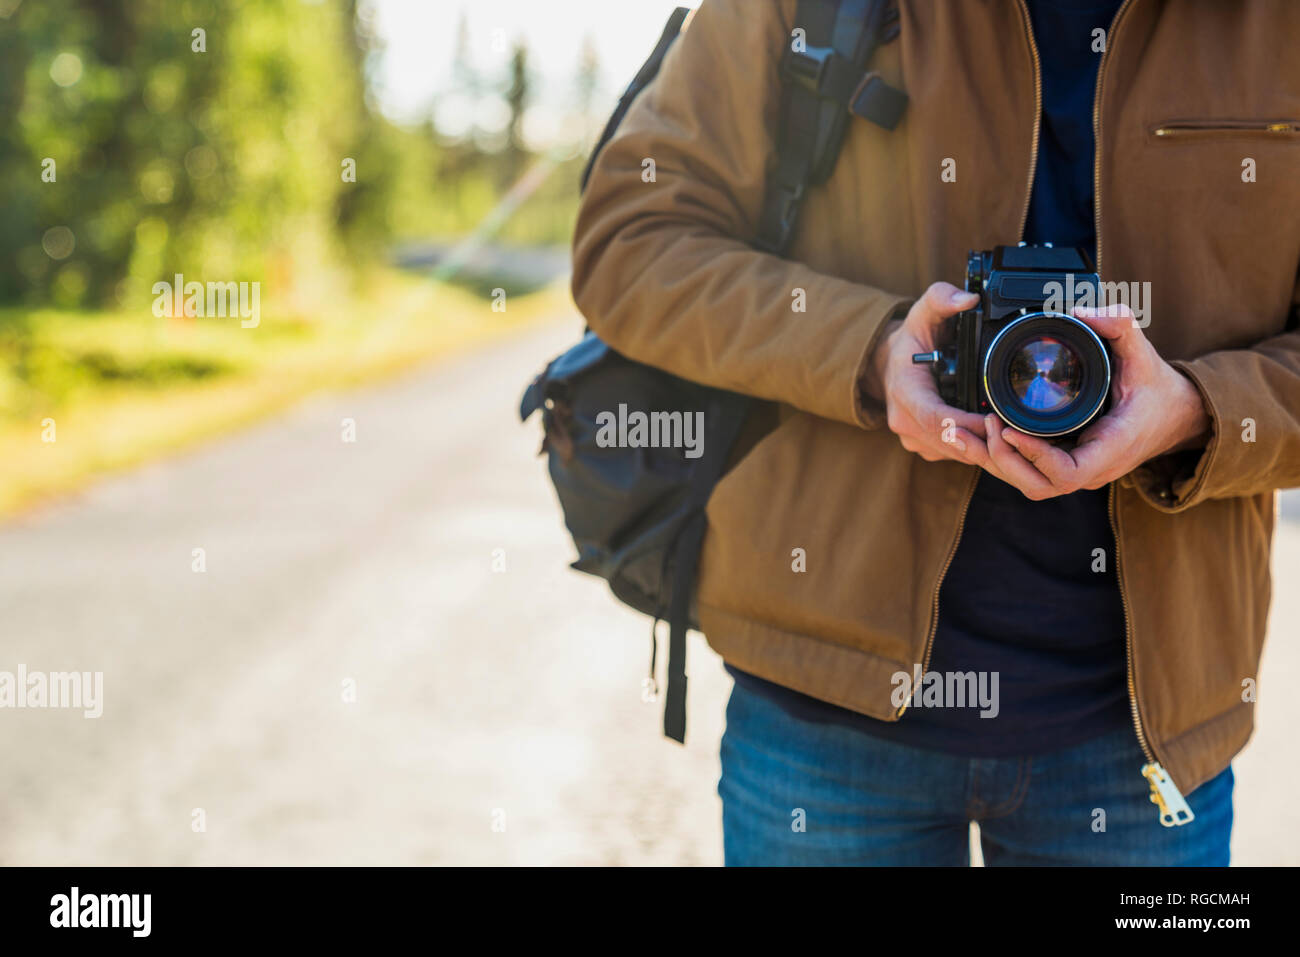 La Finlande, Laponie, close-up of man holding camera on country road Banque D'Images